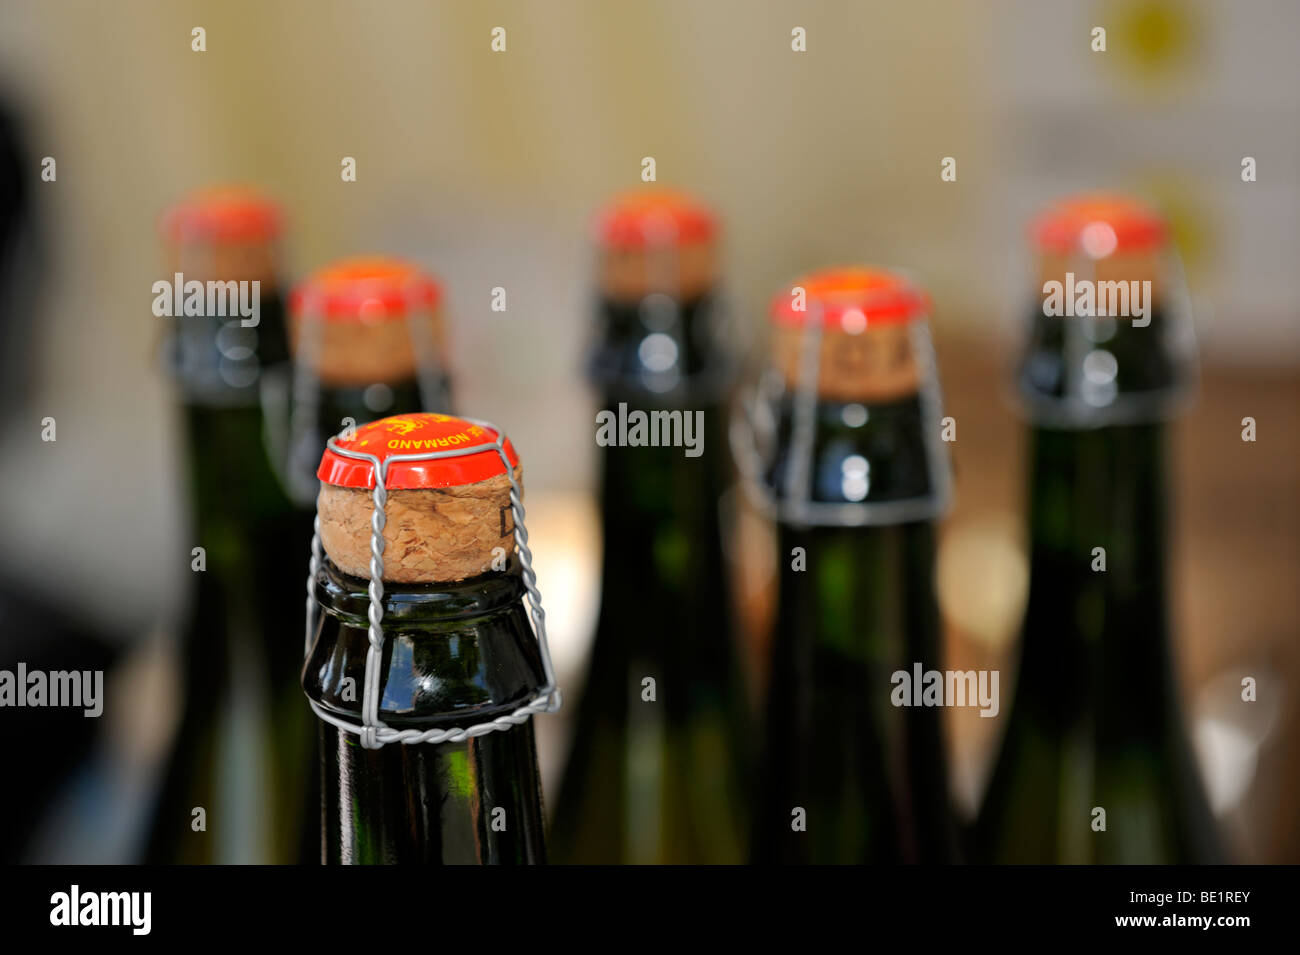 Wired, corked sparkling drinks bottle tops Stock Photo